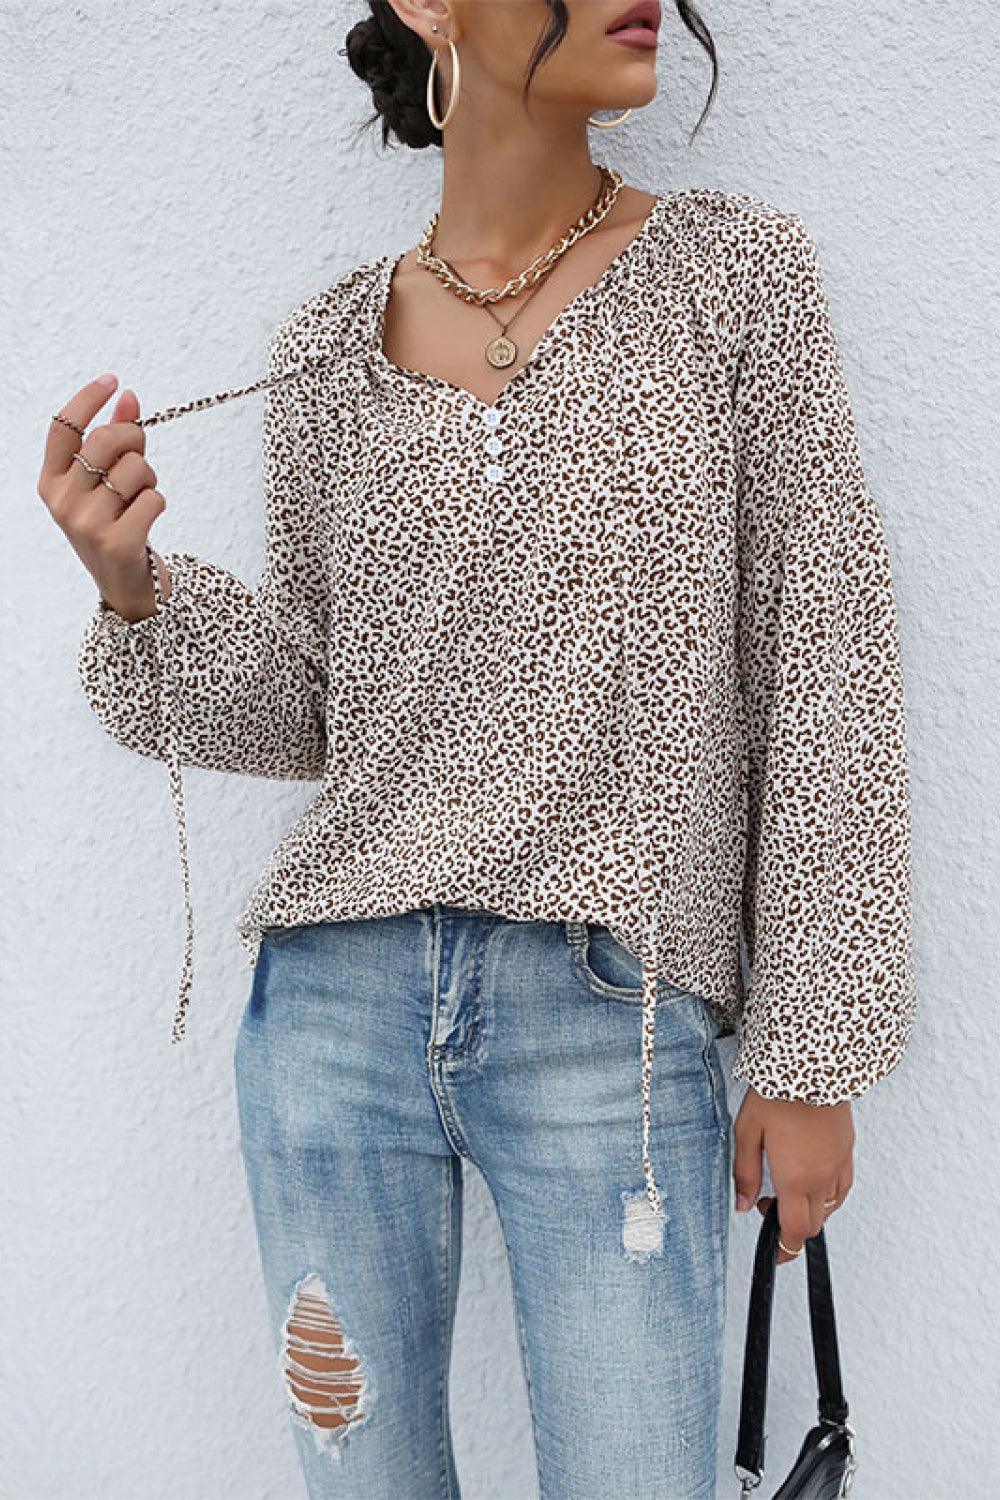 Relaxed Fit Leopard Print Balloon Sleeve Blouse - MXSTUDIO.COM